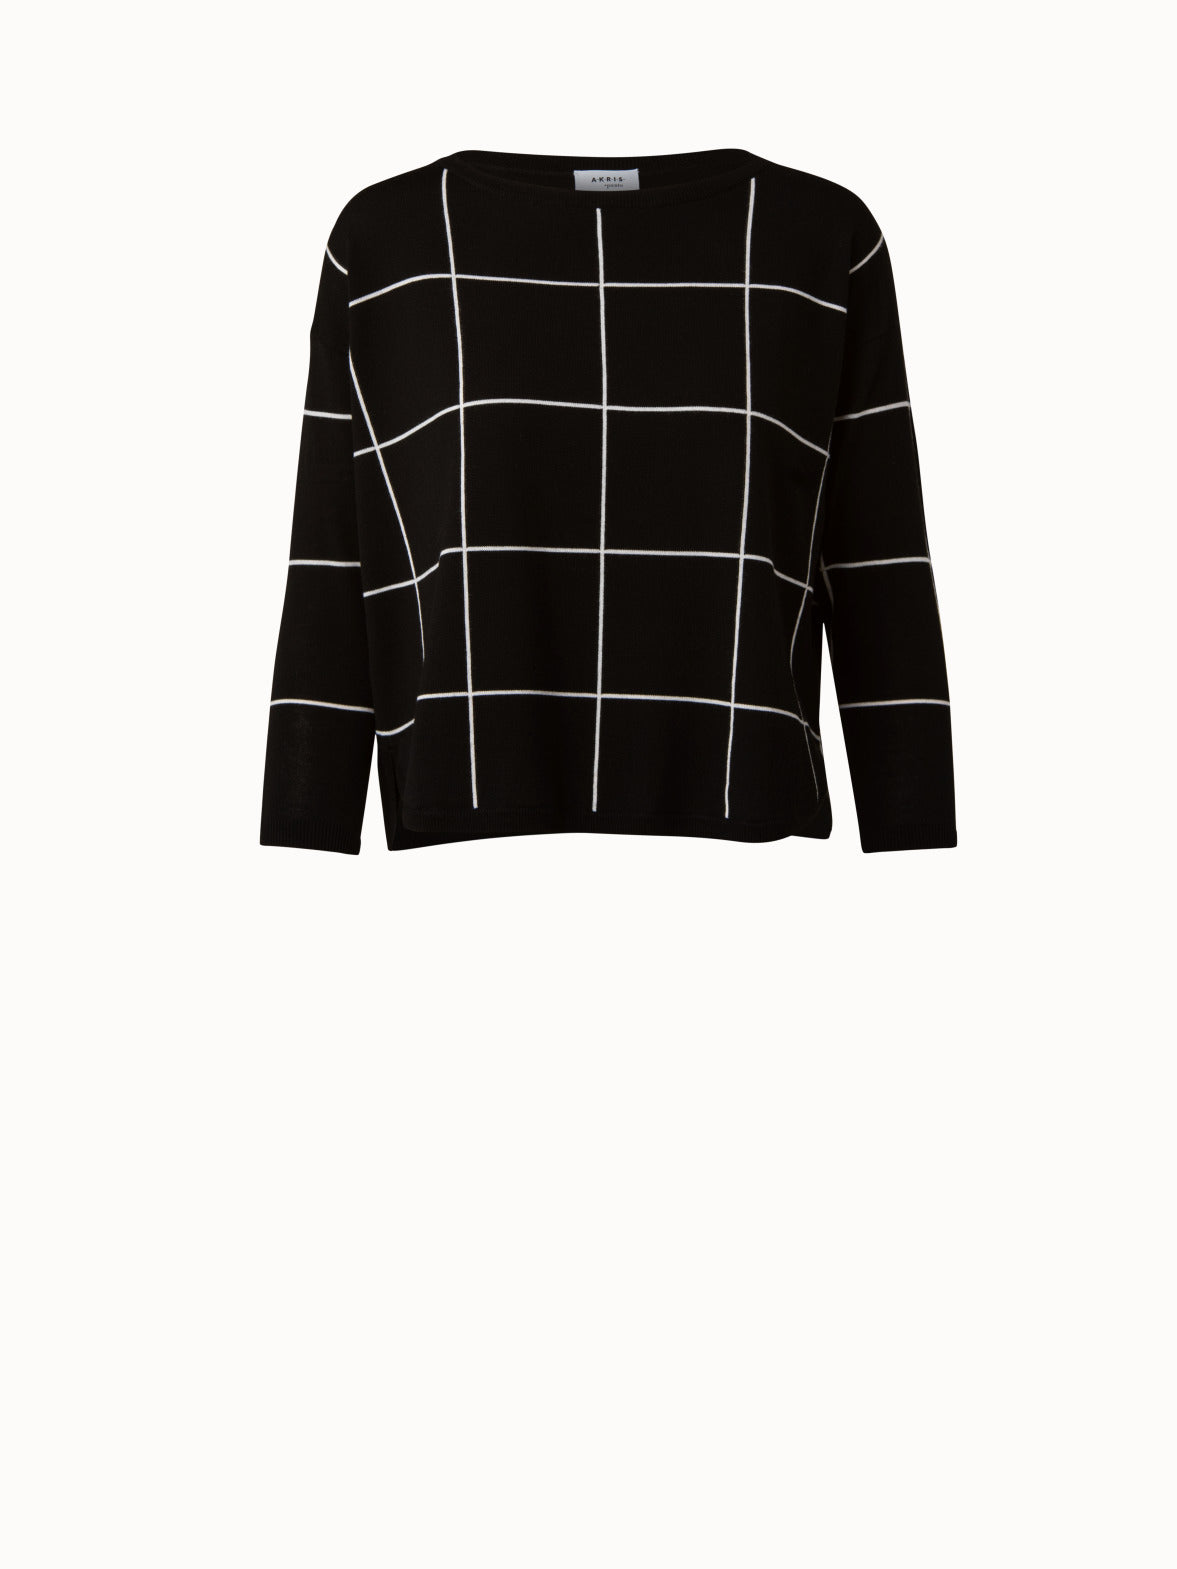 Merino Wool Knit Pullover with Window Check Print